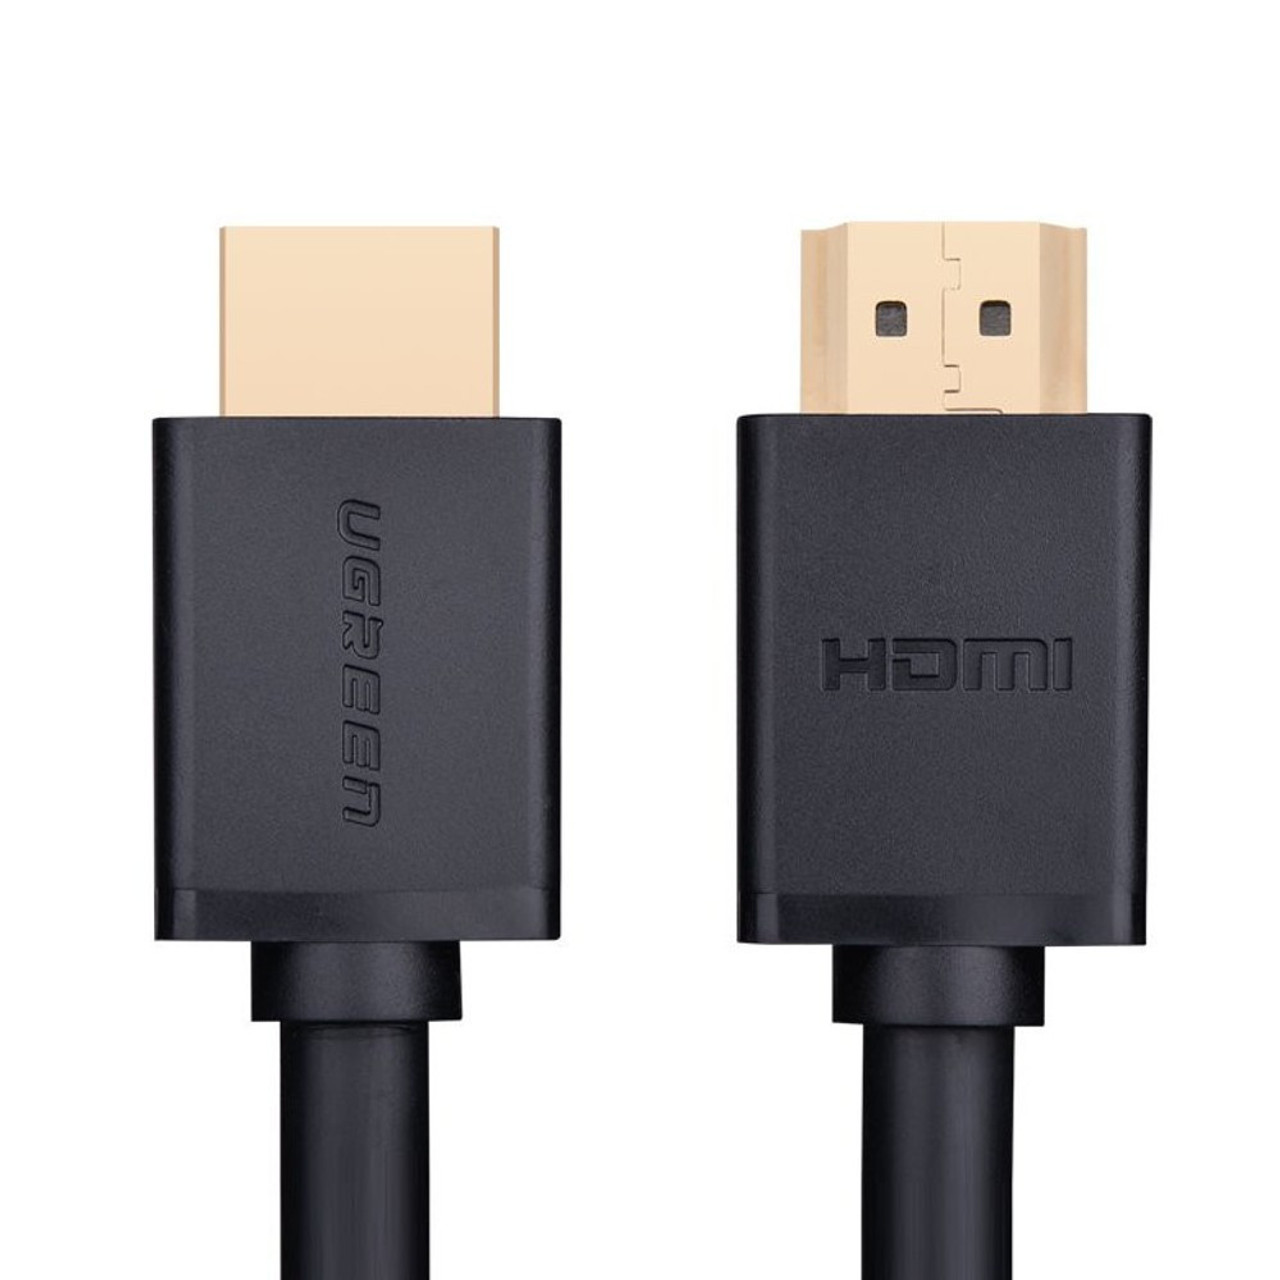 20 m High Speed HDMI Cable with Ethernet - 2L-7D20H, ATEN HDMI Cables